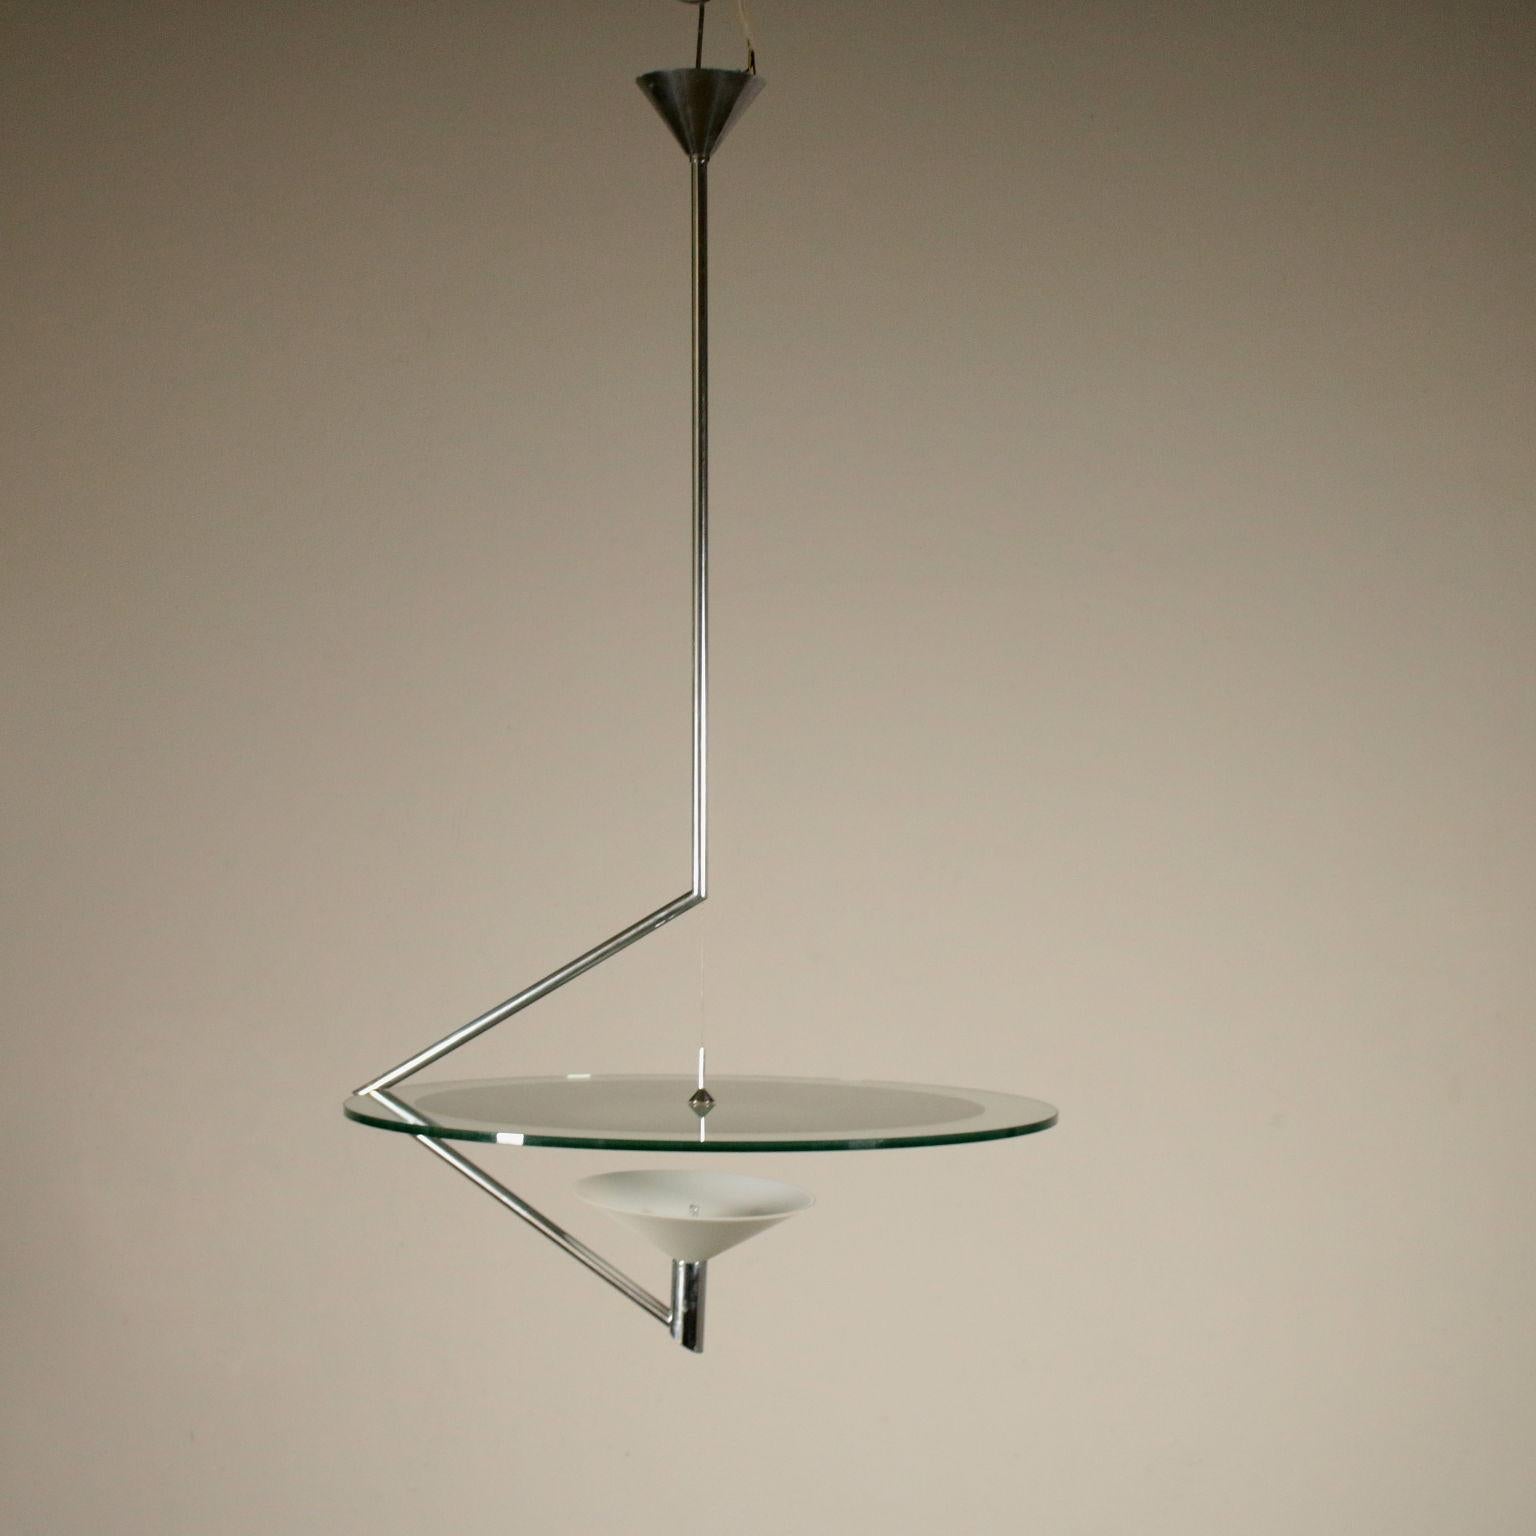 Ceiling lamp designed by Daniela Puppa (1947) for Fontana Arte. Chromed steel, glass. Manufactured in Milan, Italy, 1980s.